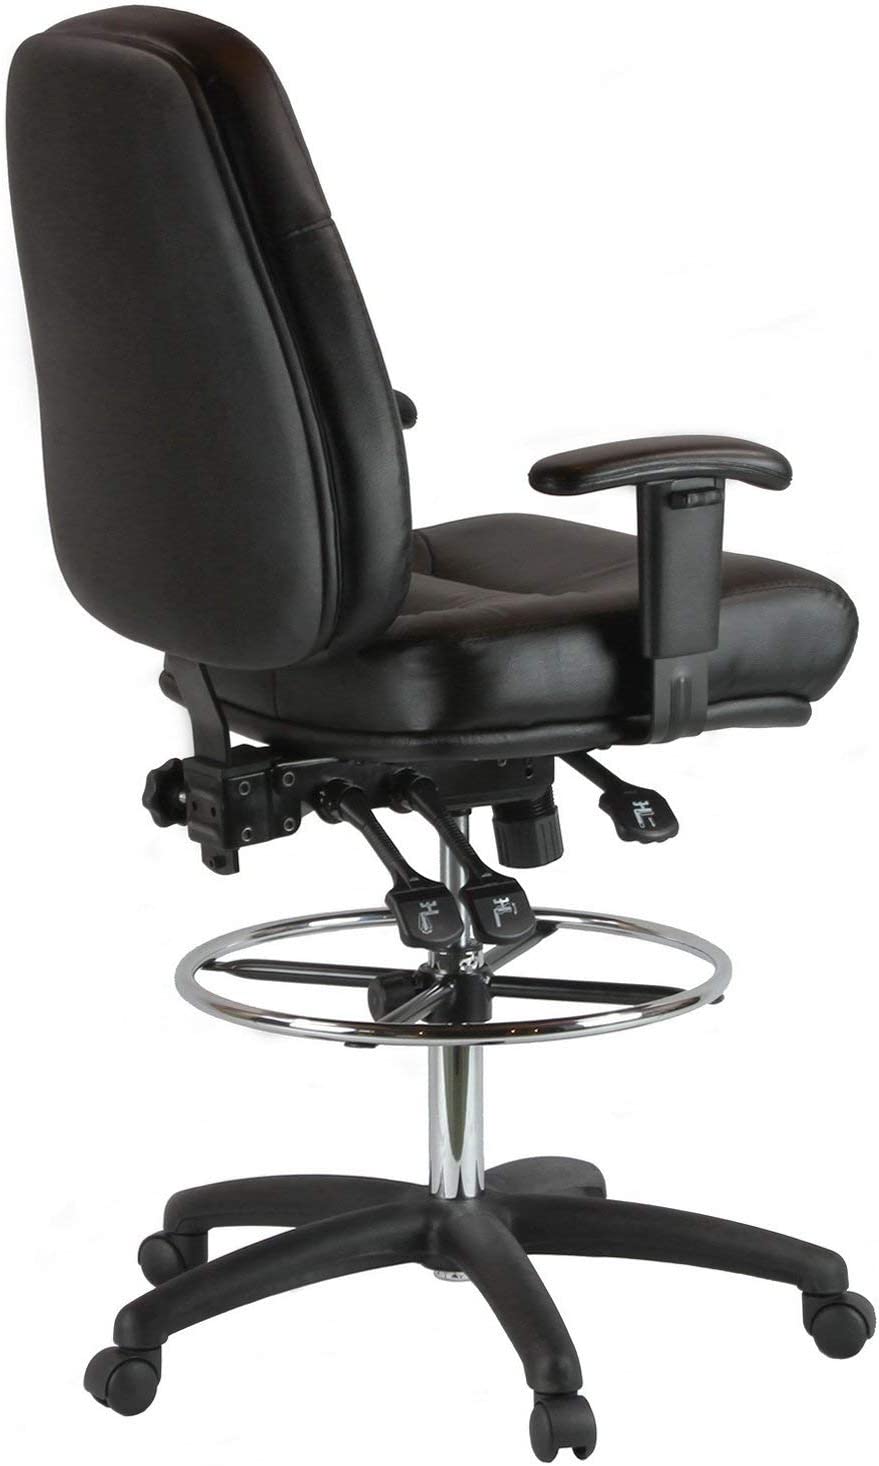 Harwick Premium Leather Drafting Chair with Arms - Black Leather